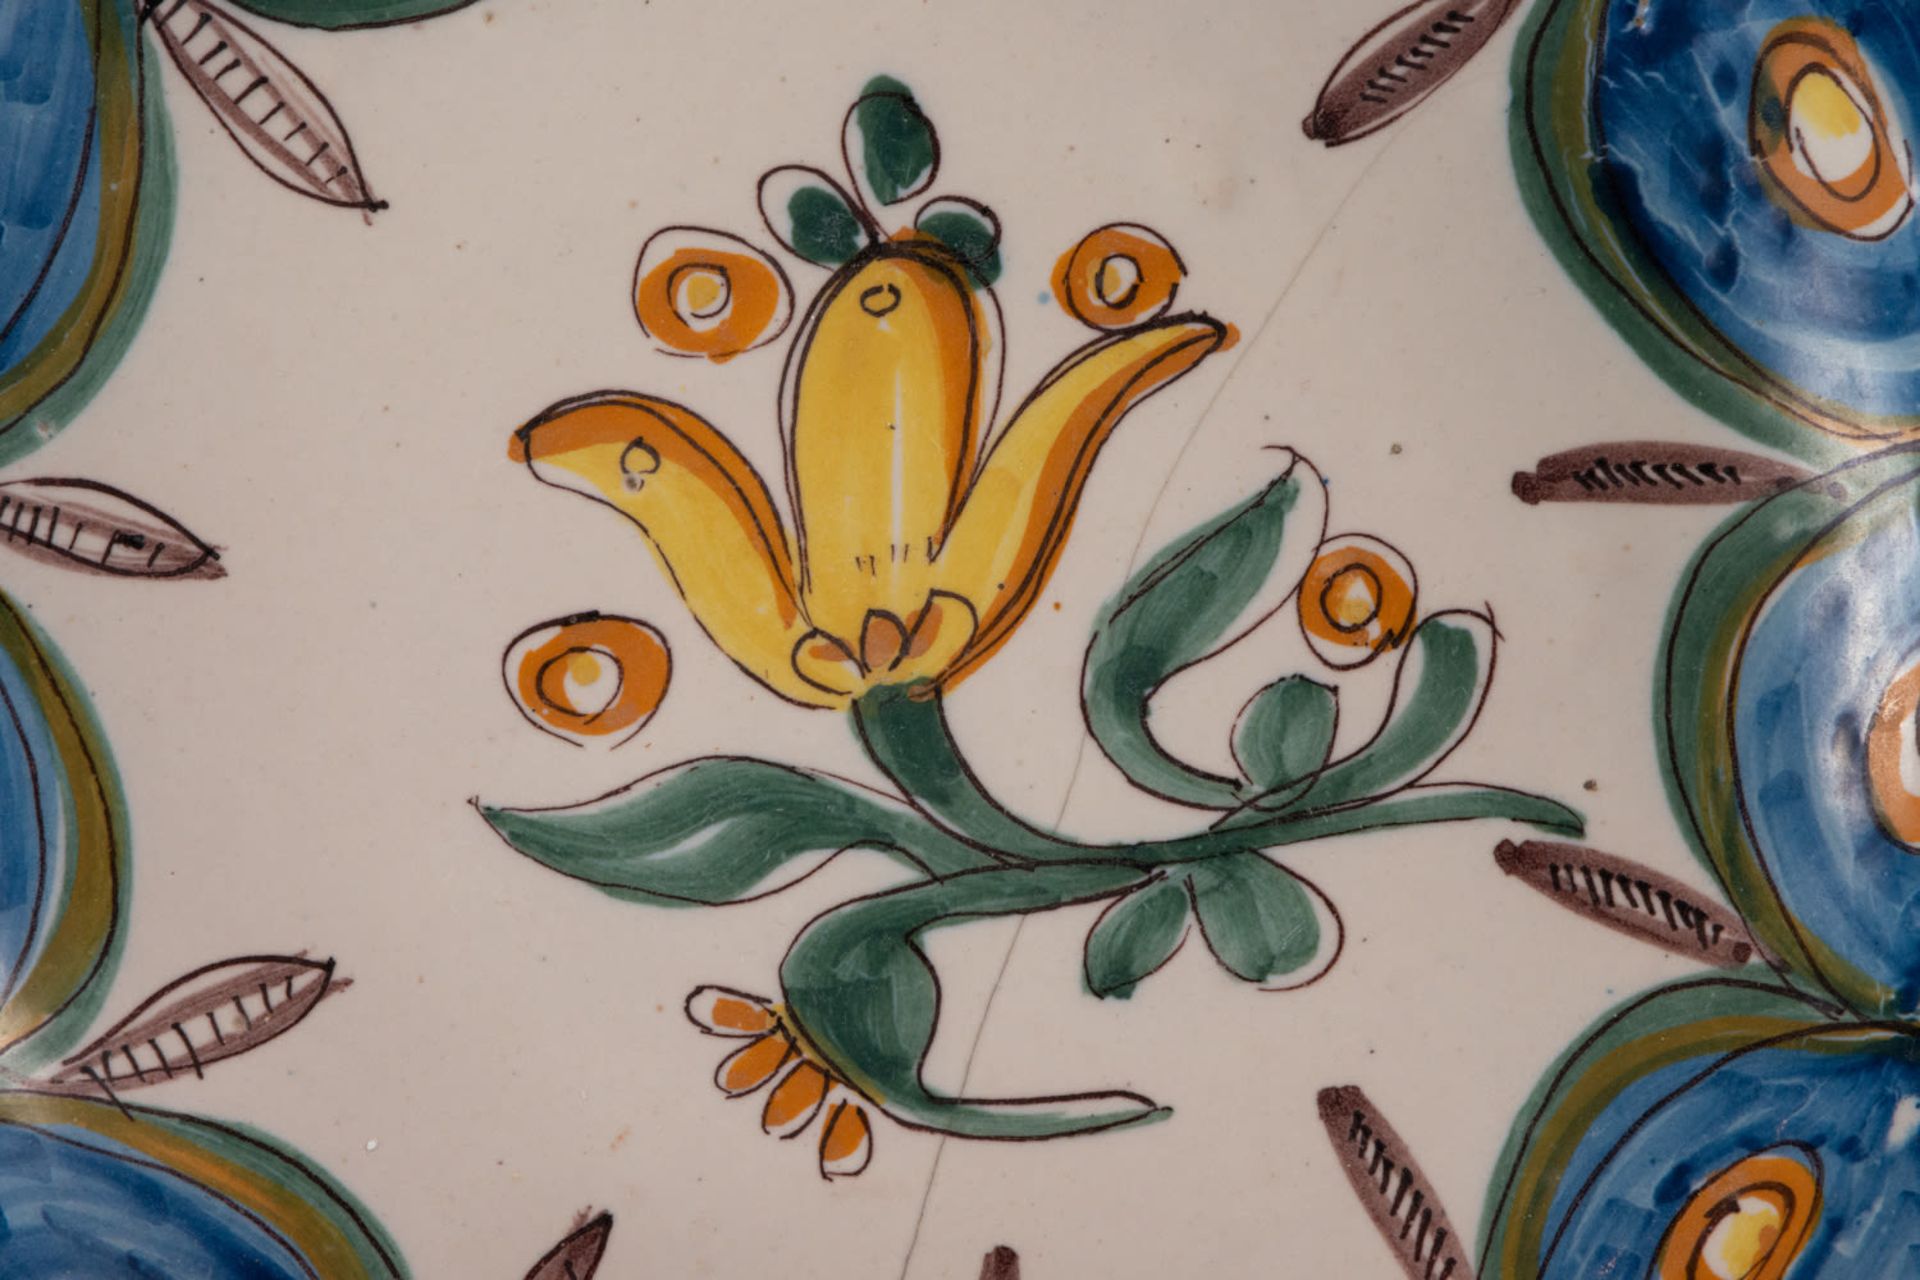 Ceramic plate from Manises, 19th century - Image 2 of 3